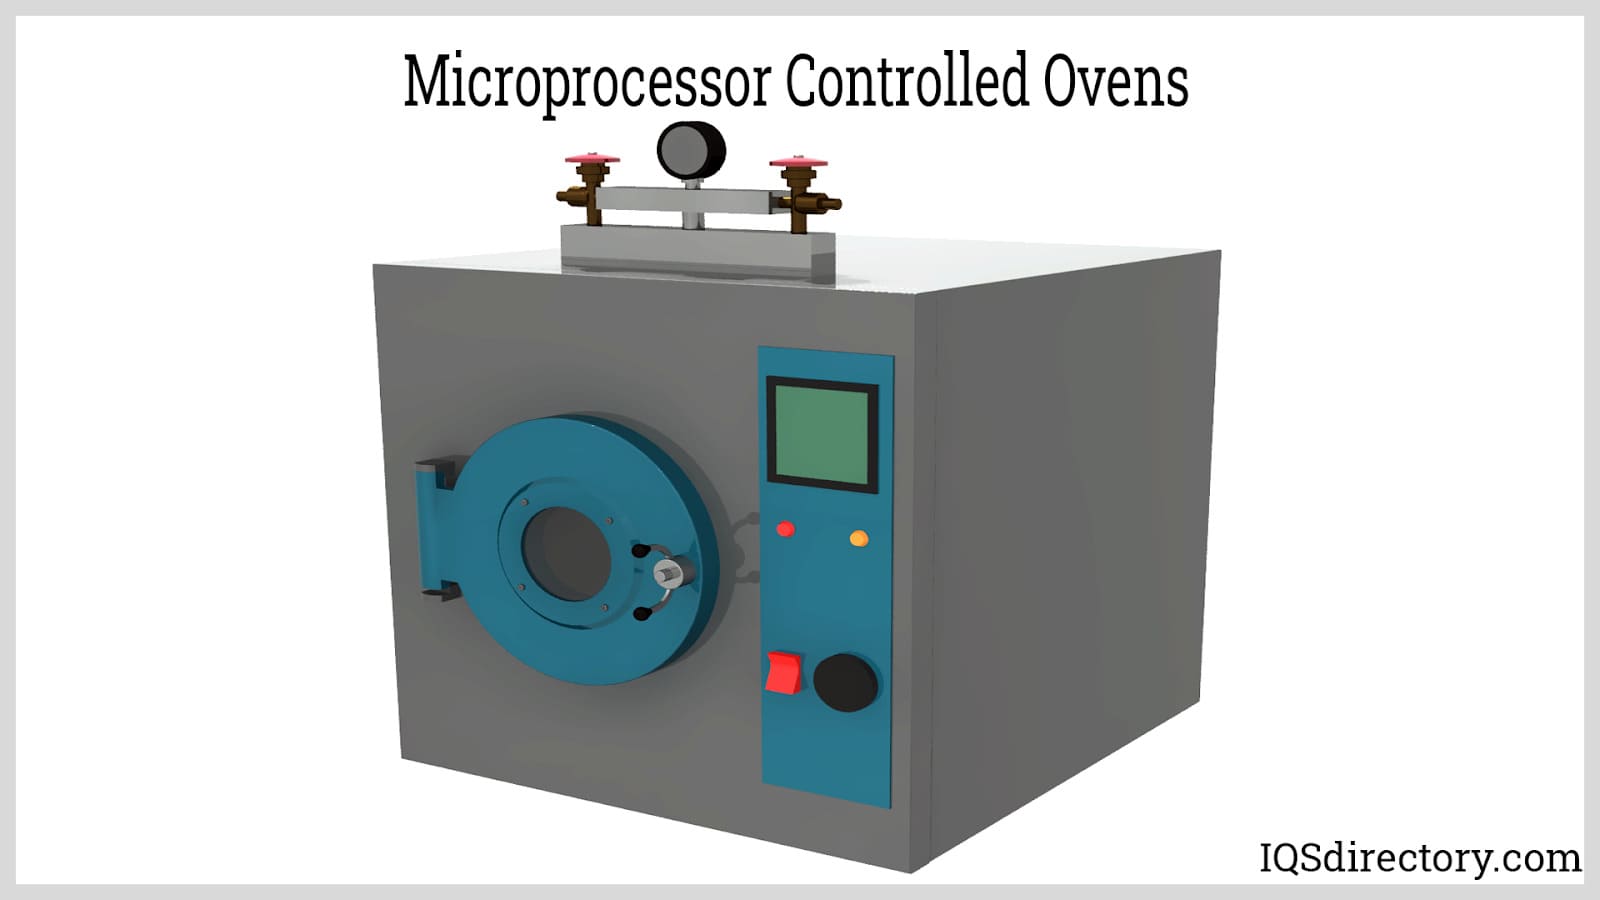 Microprocessor Controlled Ovens